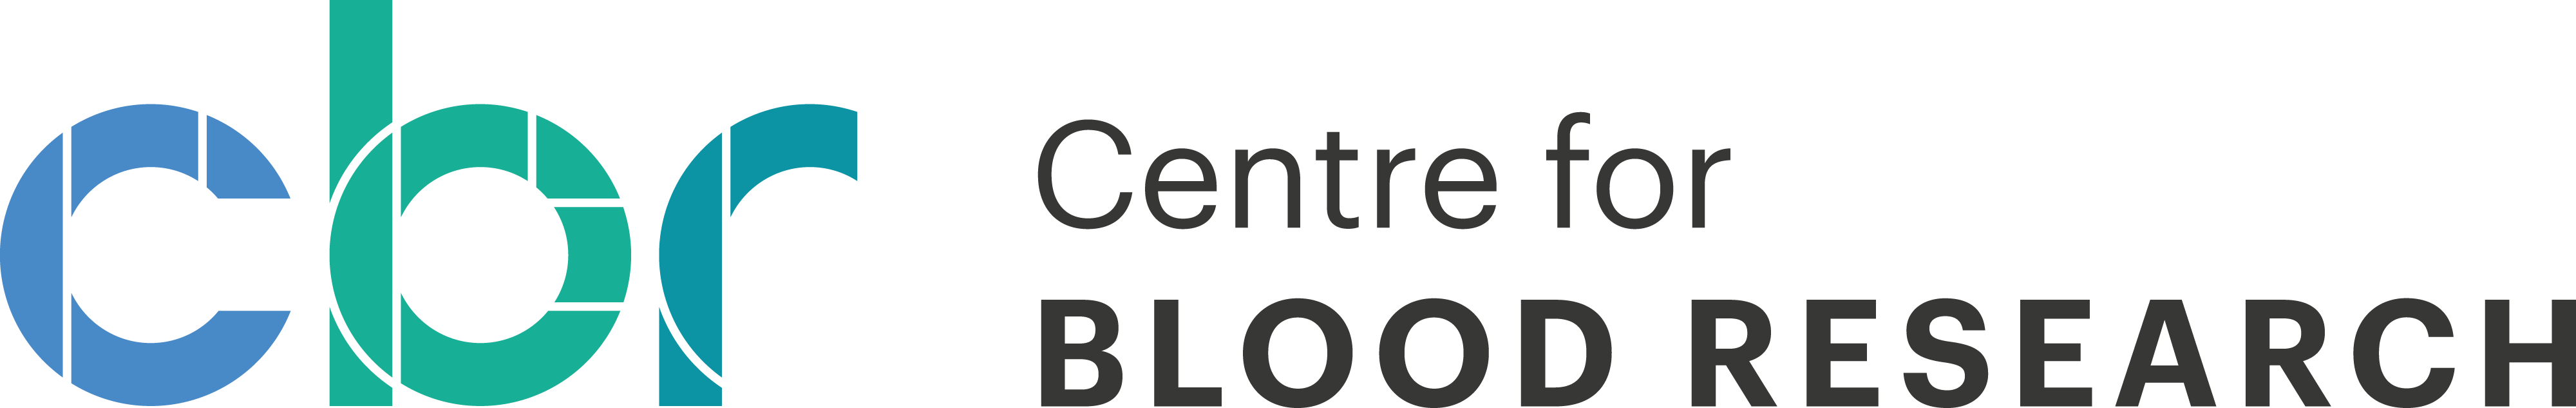 Centre for Blood Research